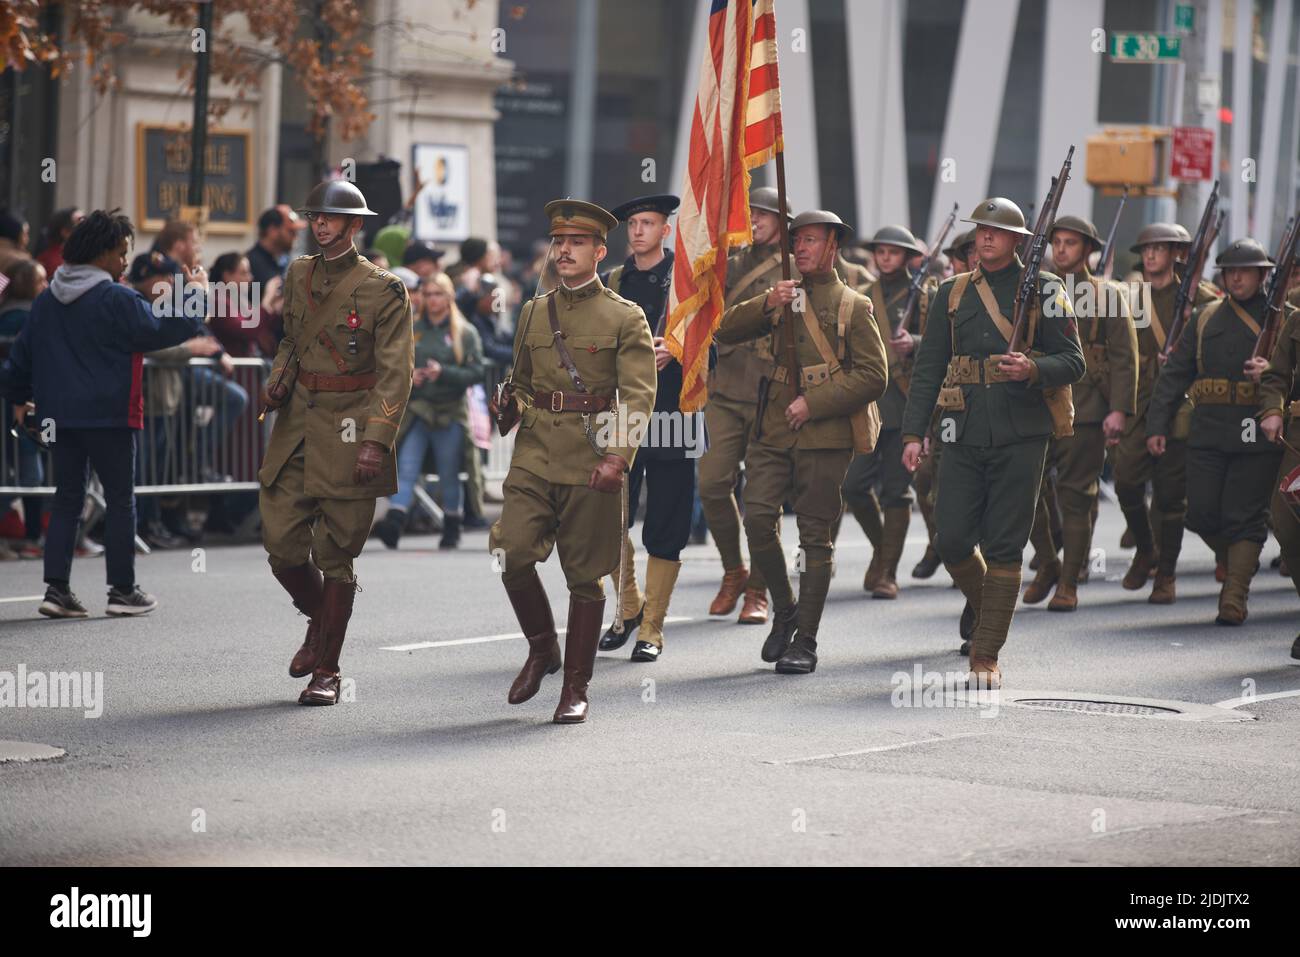 Manhattan, New York,USA - November 11. 2019: NYC honors Veterans. Soldiers marching in World War 1 Uniforms Stock Photo